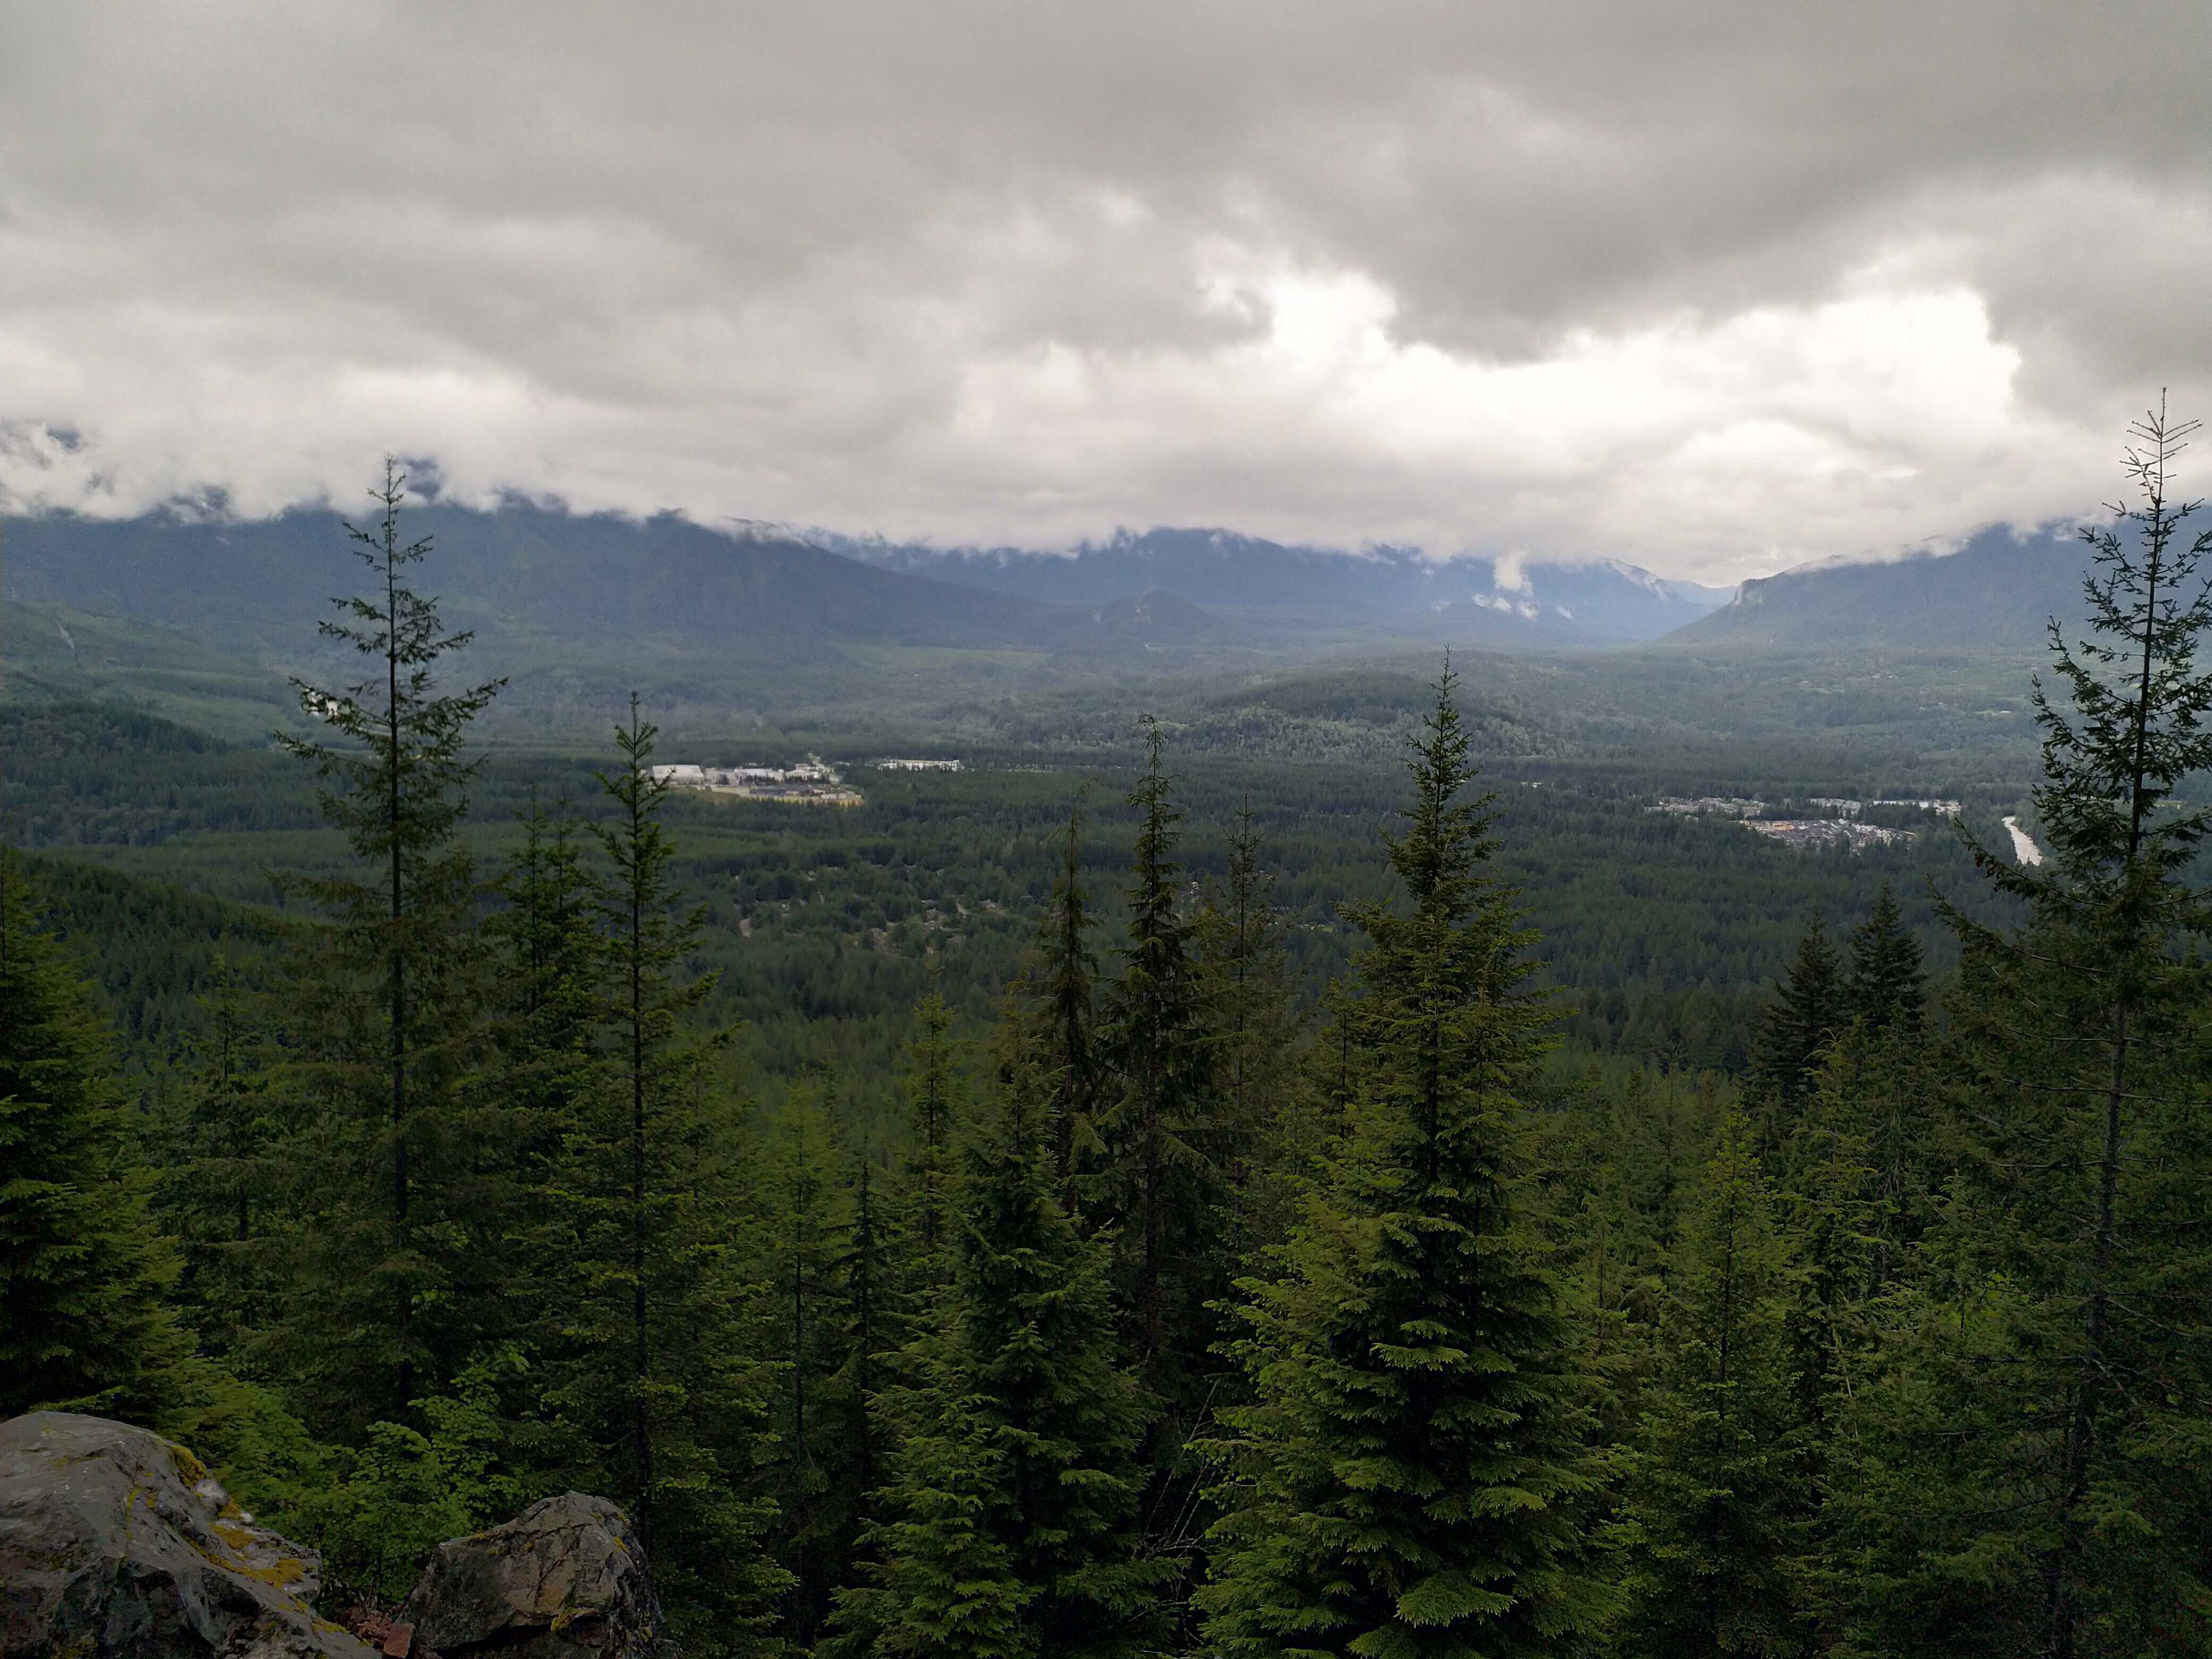 A very quintessential Pacific Northwest landscape seen from a viewpoint during a hike.